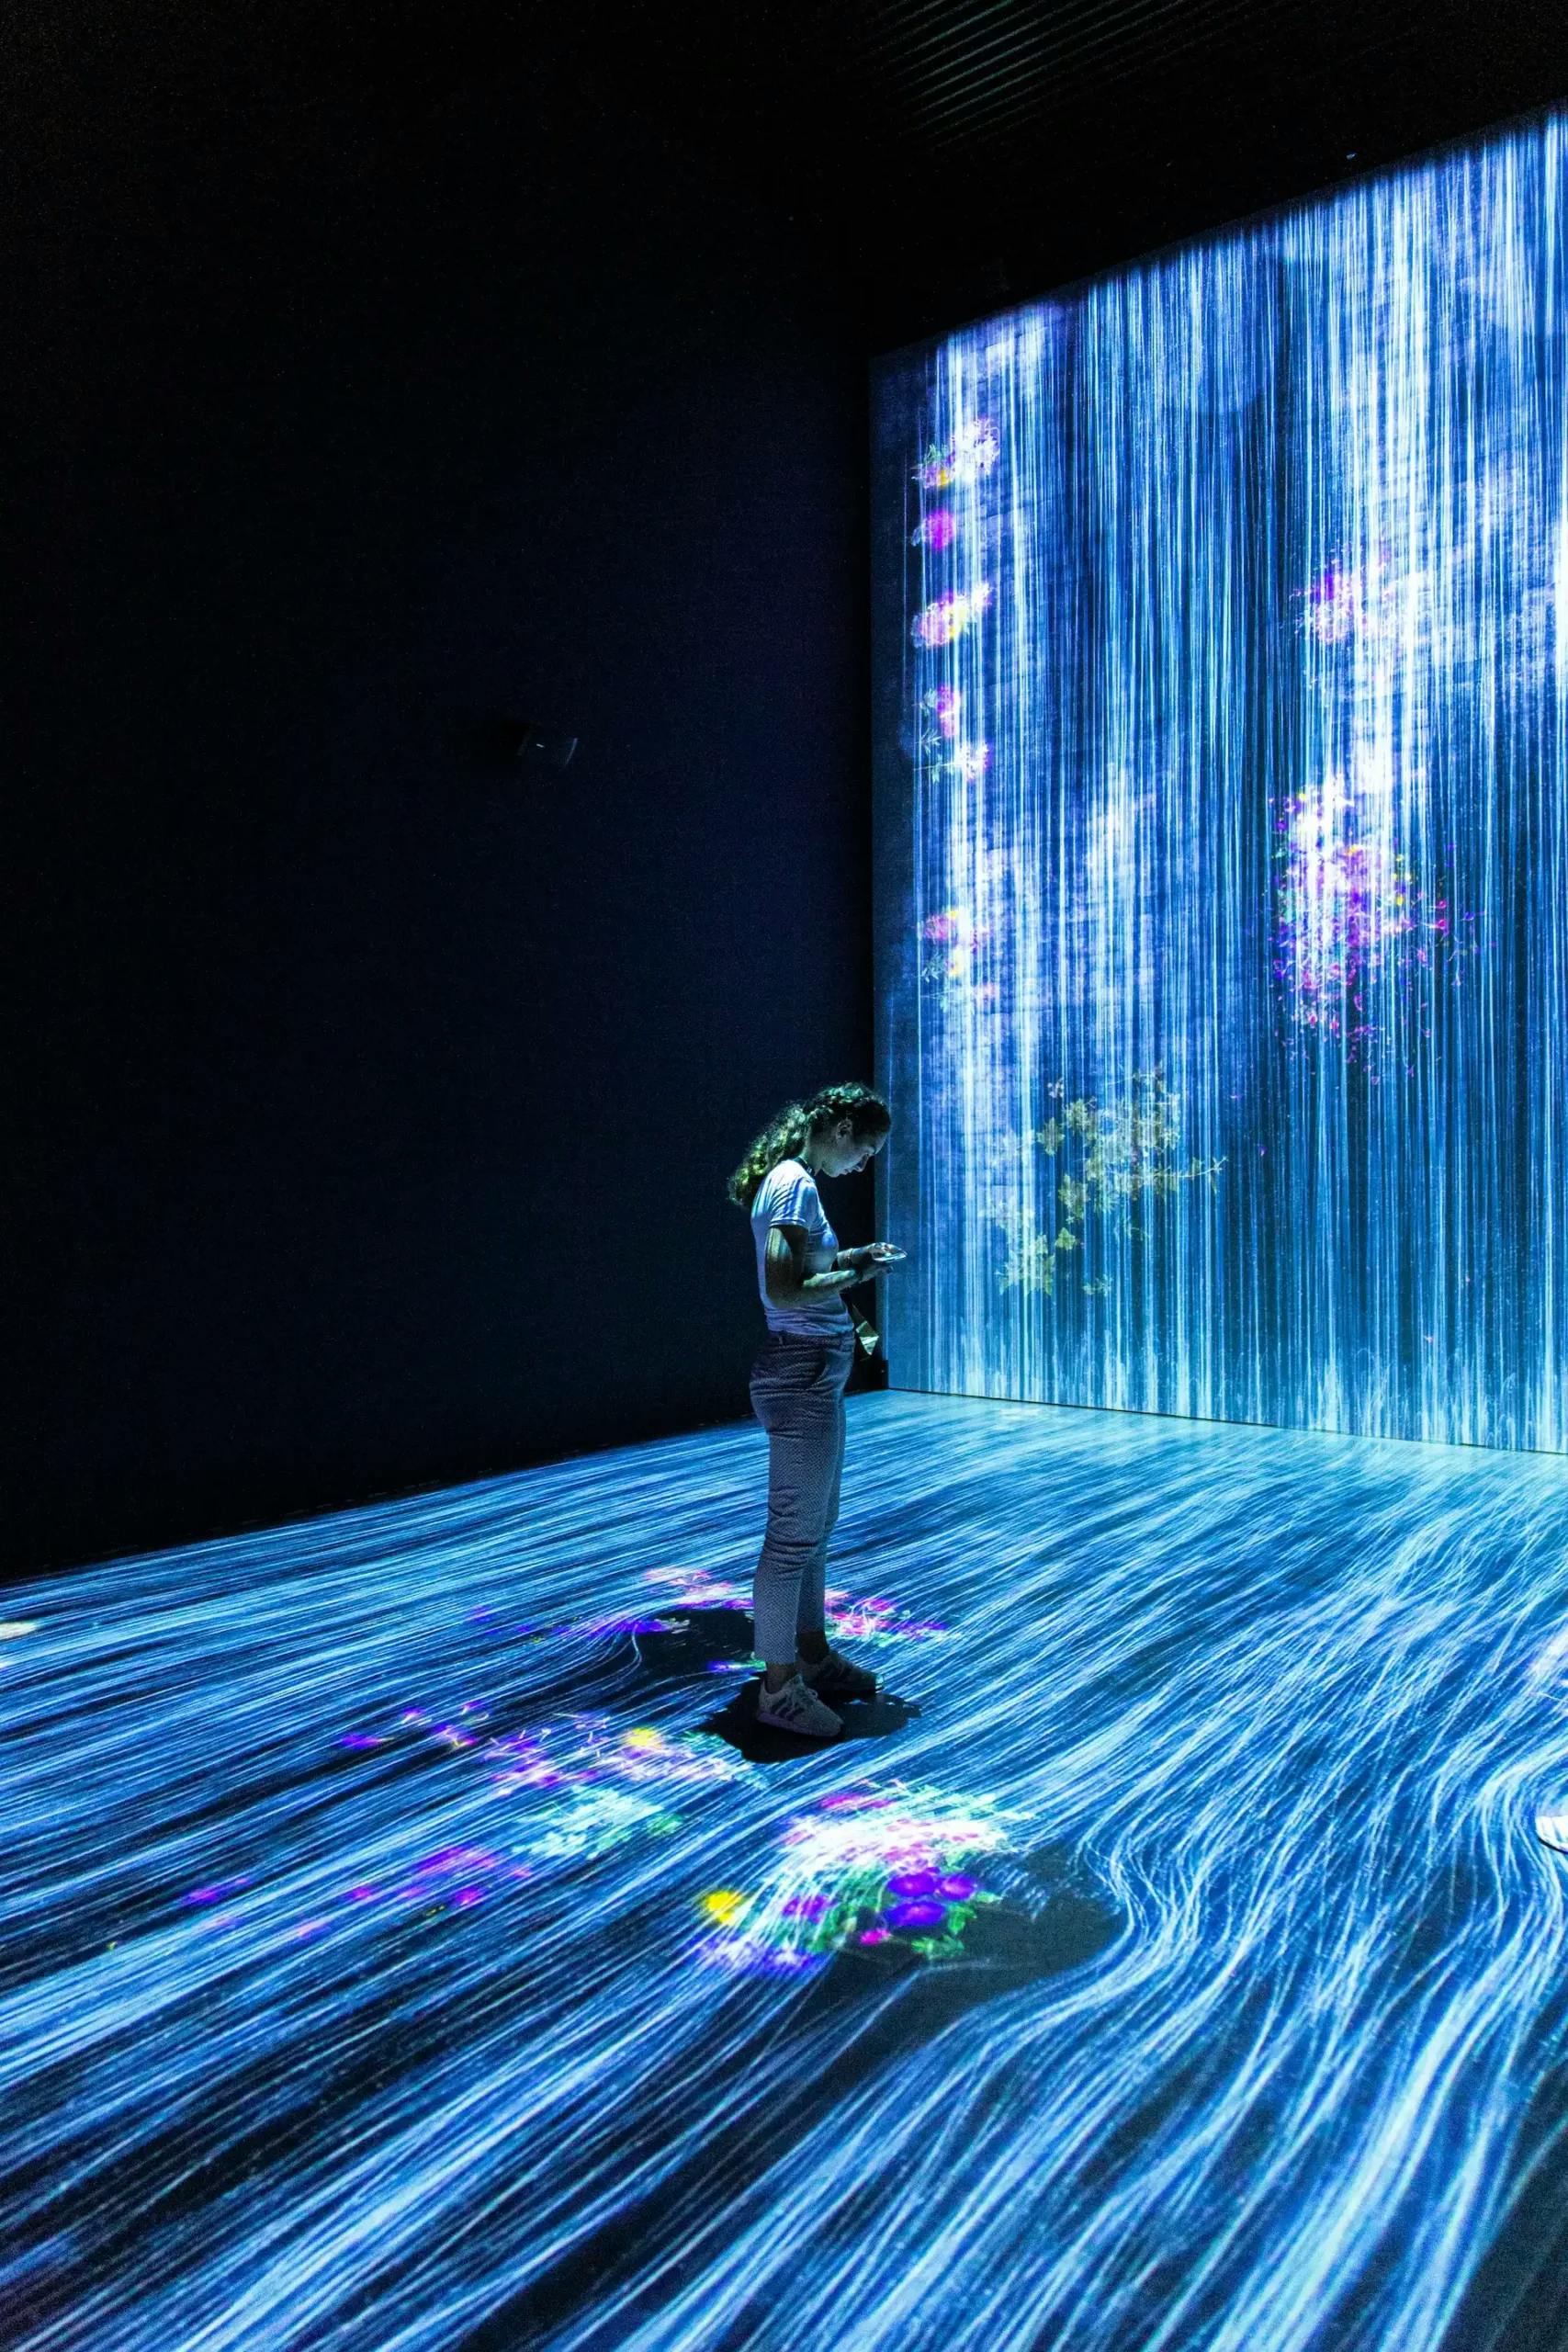 Person experiencing an interactive digital art installation with vibrant light patterns on the walls and floor